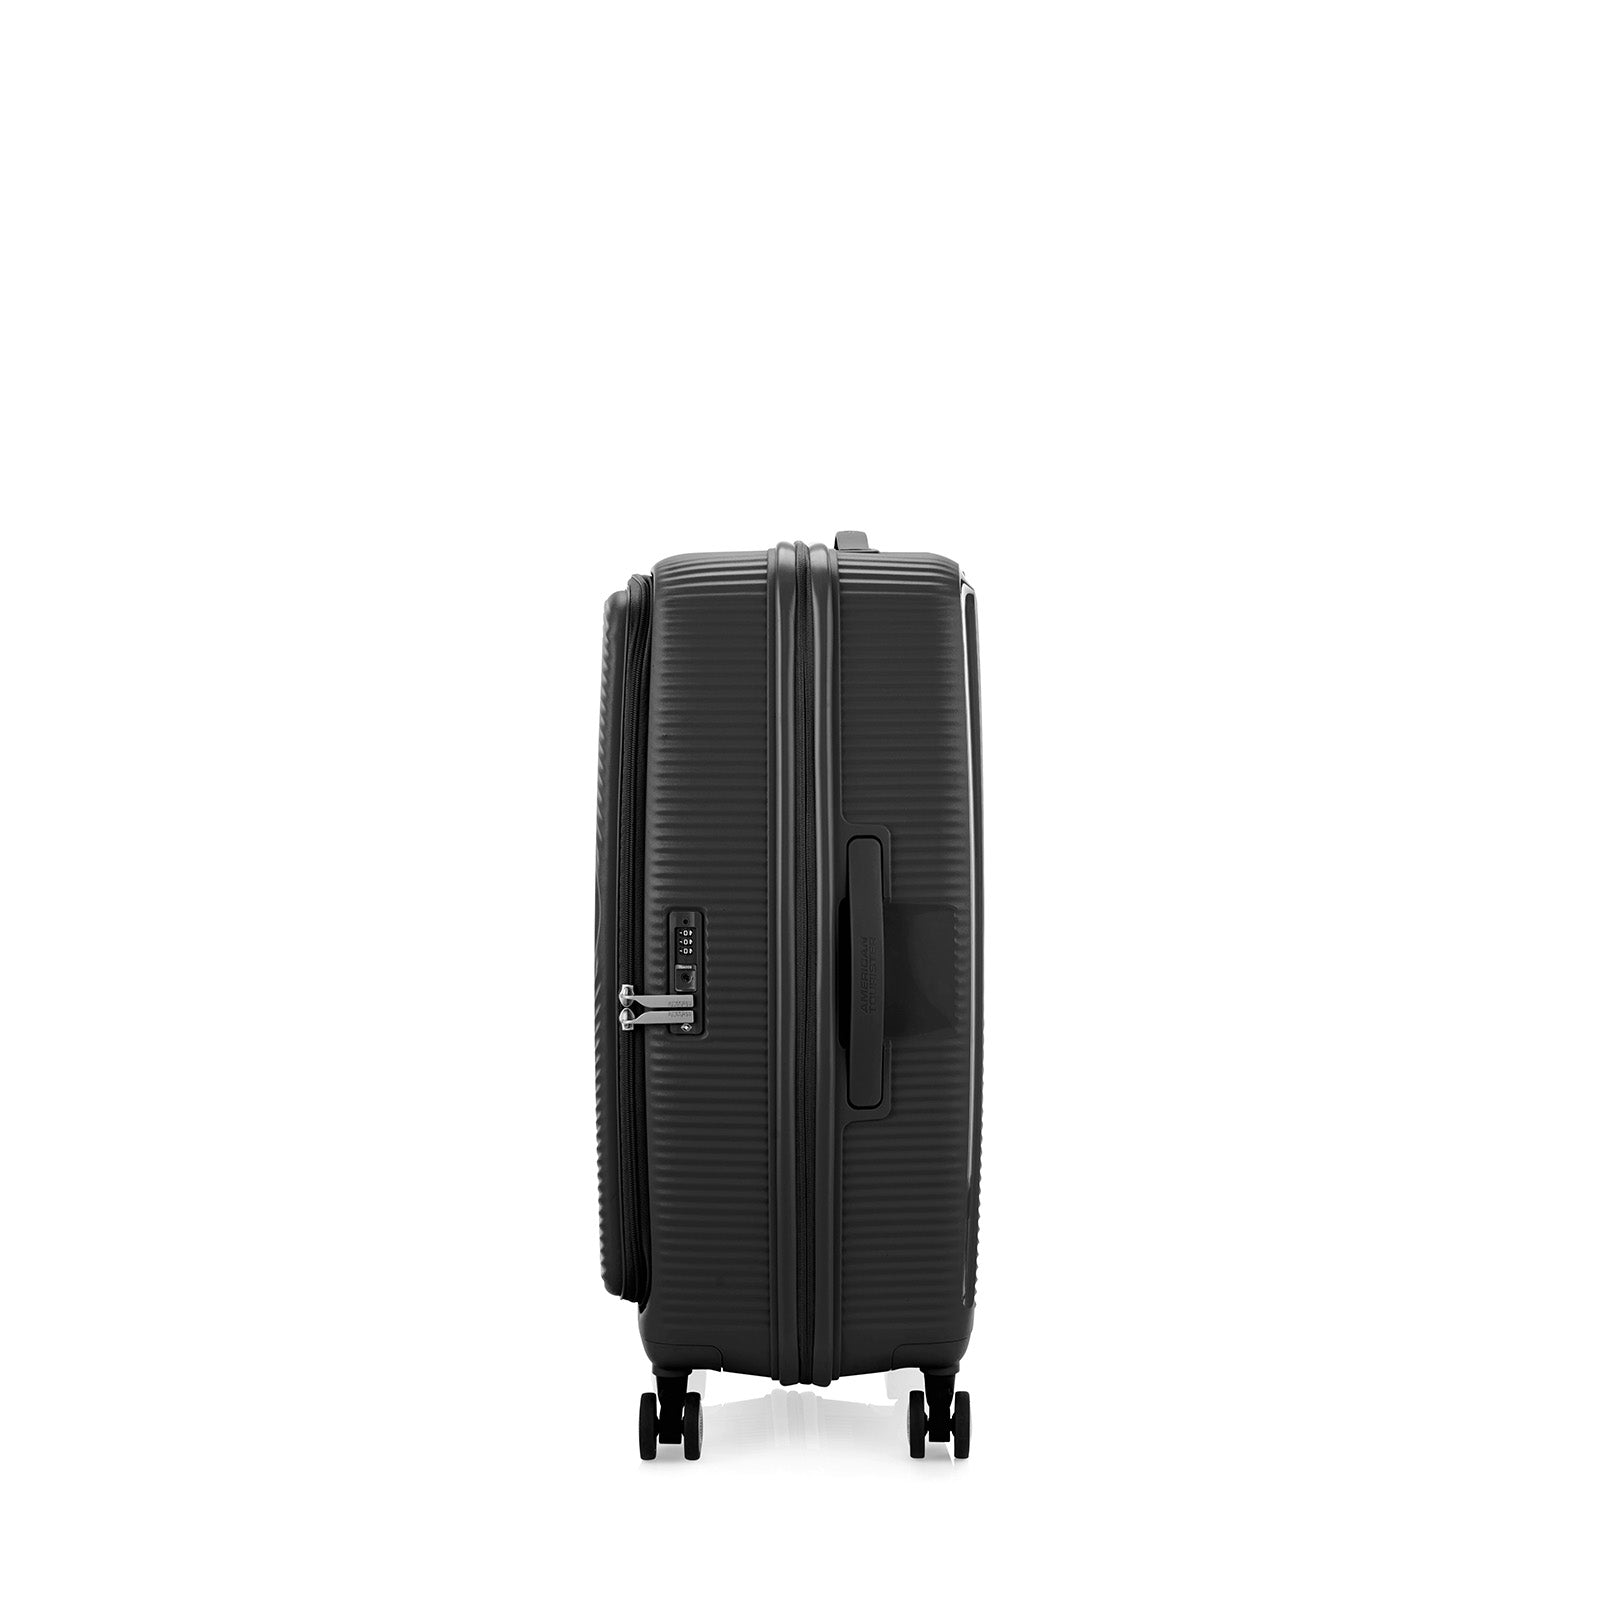 American-Tourister-Curio-Book-Opening-75cm-Suitcase-Black-Side-Lock